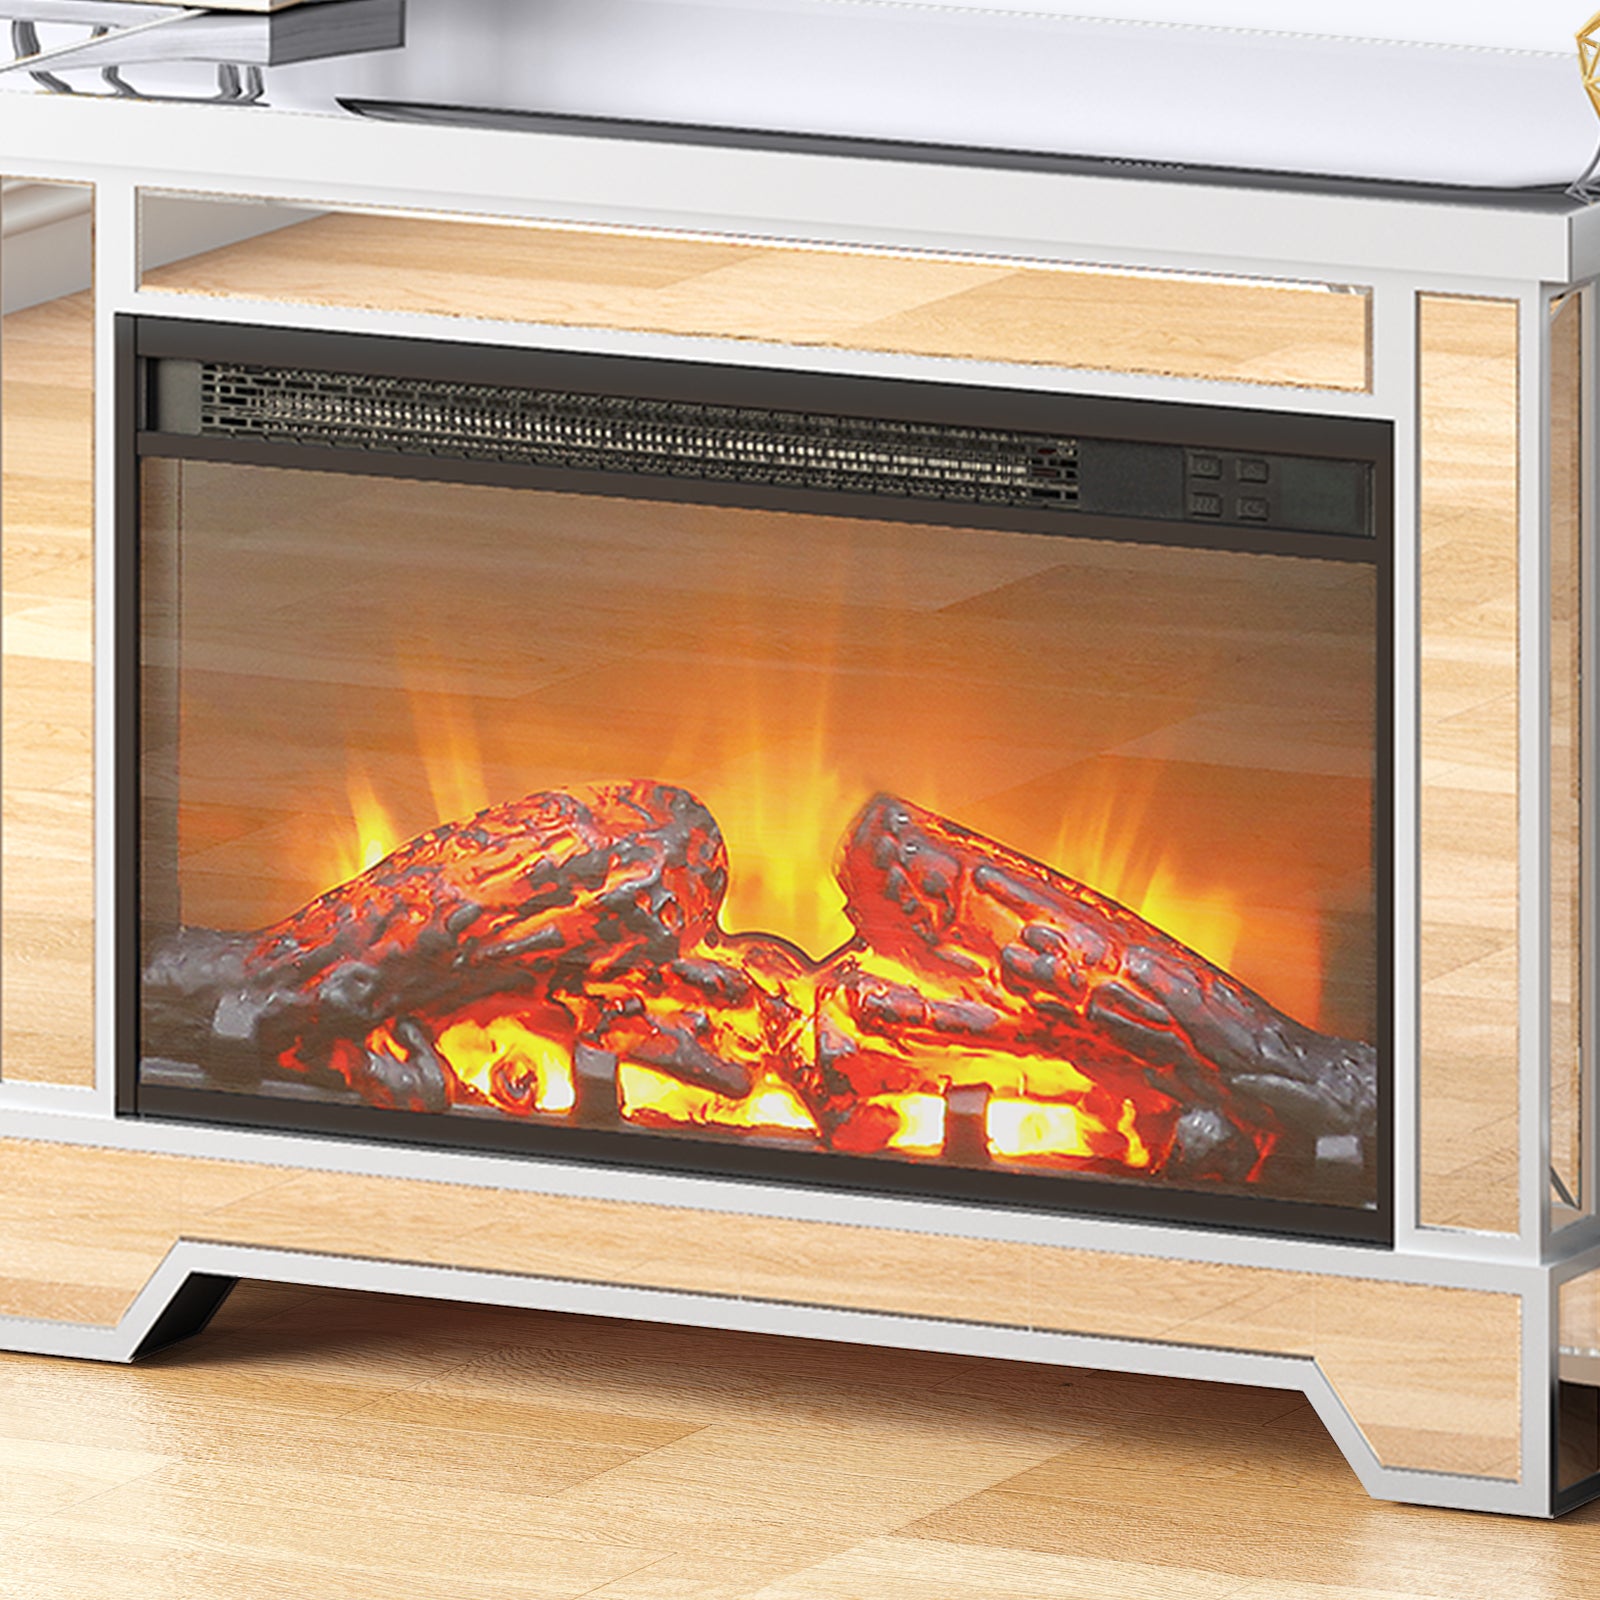 Mjkone Mirrored Fireplace TV Stand, Modern LED Living Room Console Entertainment Center, Hot Air Conditioning, Overheat Protection, 7 Colors Flames, 2 Door Television Cabinet